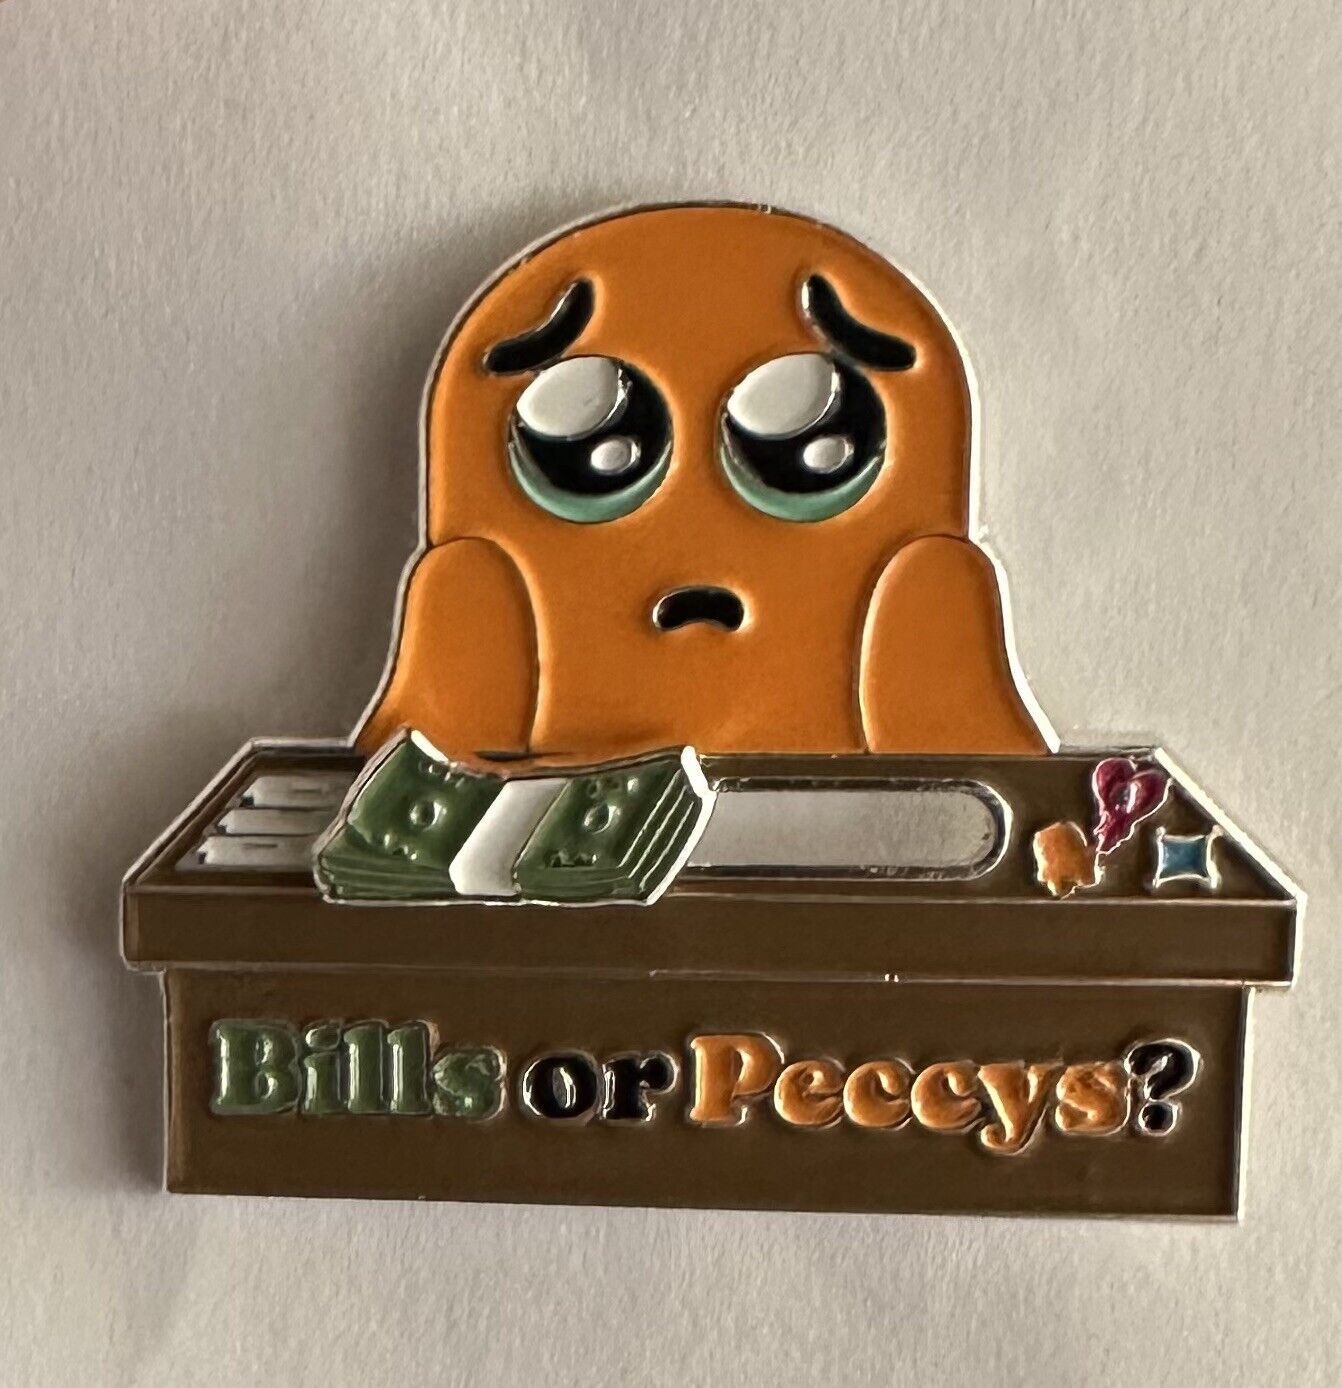 Amazon Peccy Slider “ Buy Peccy Or Pay Bills” Pin